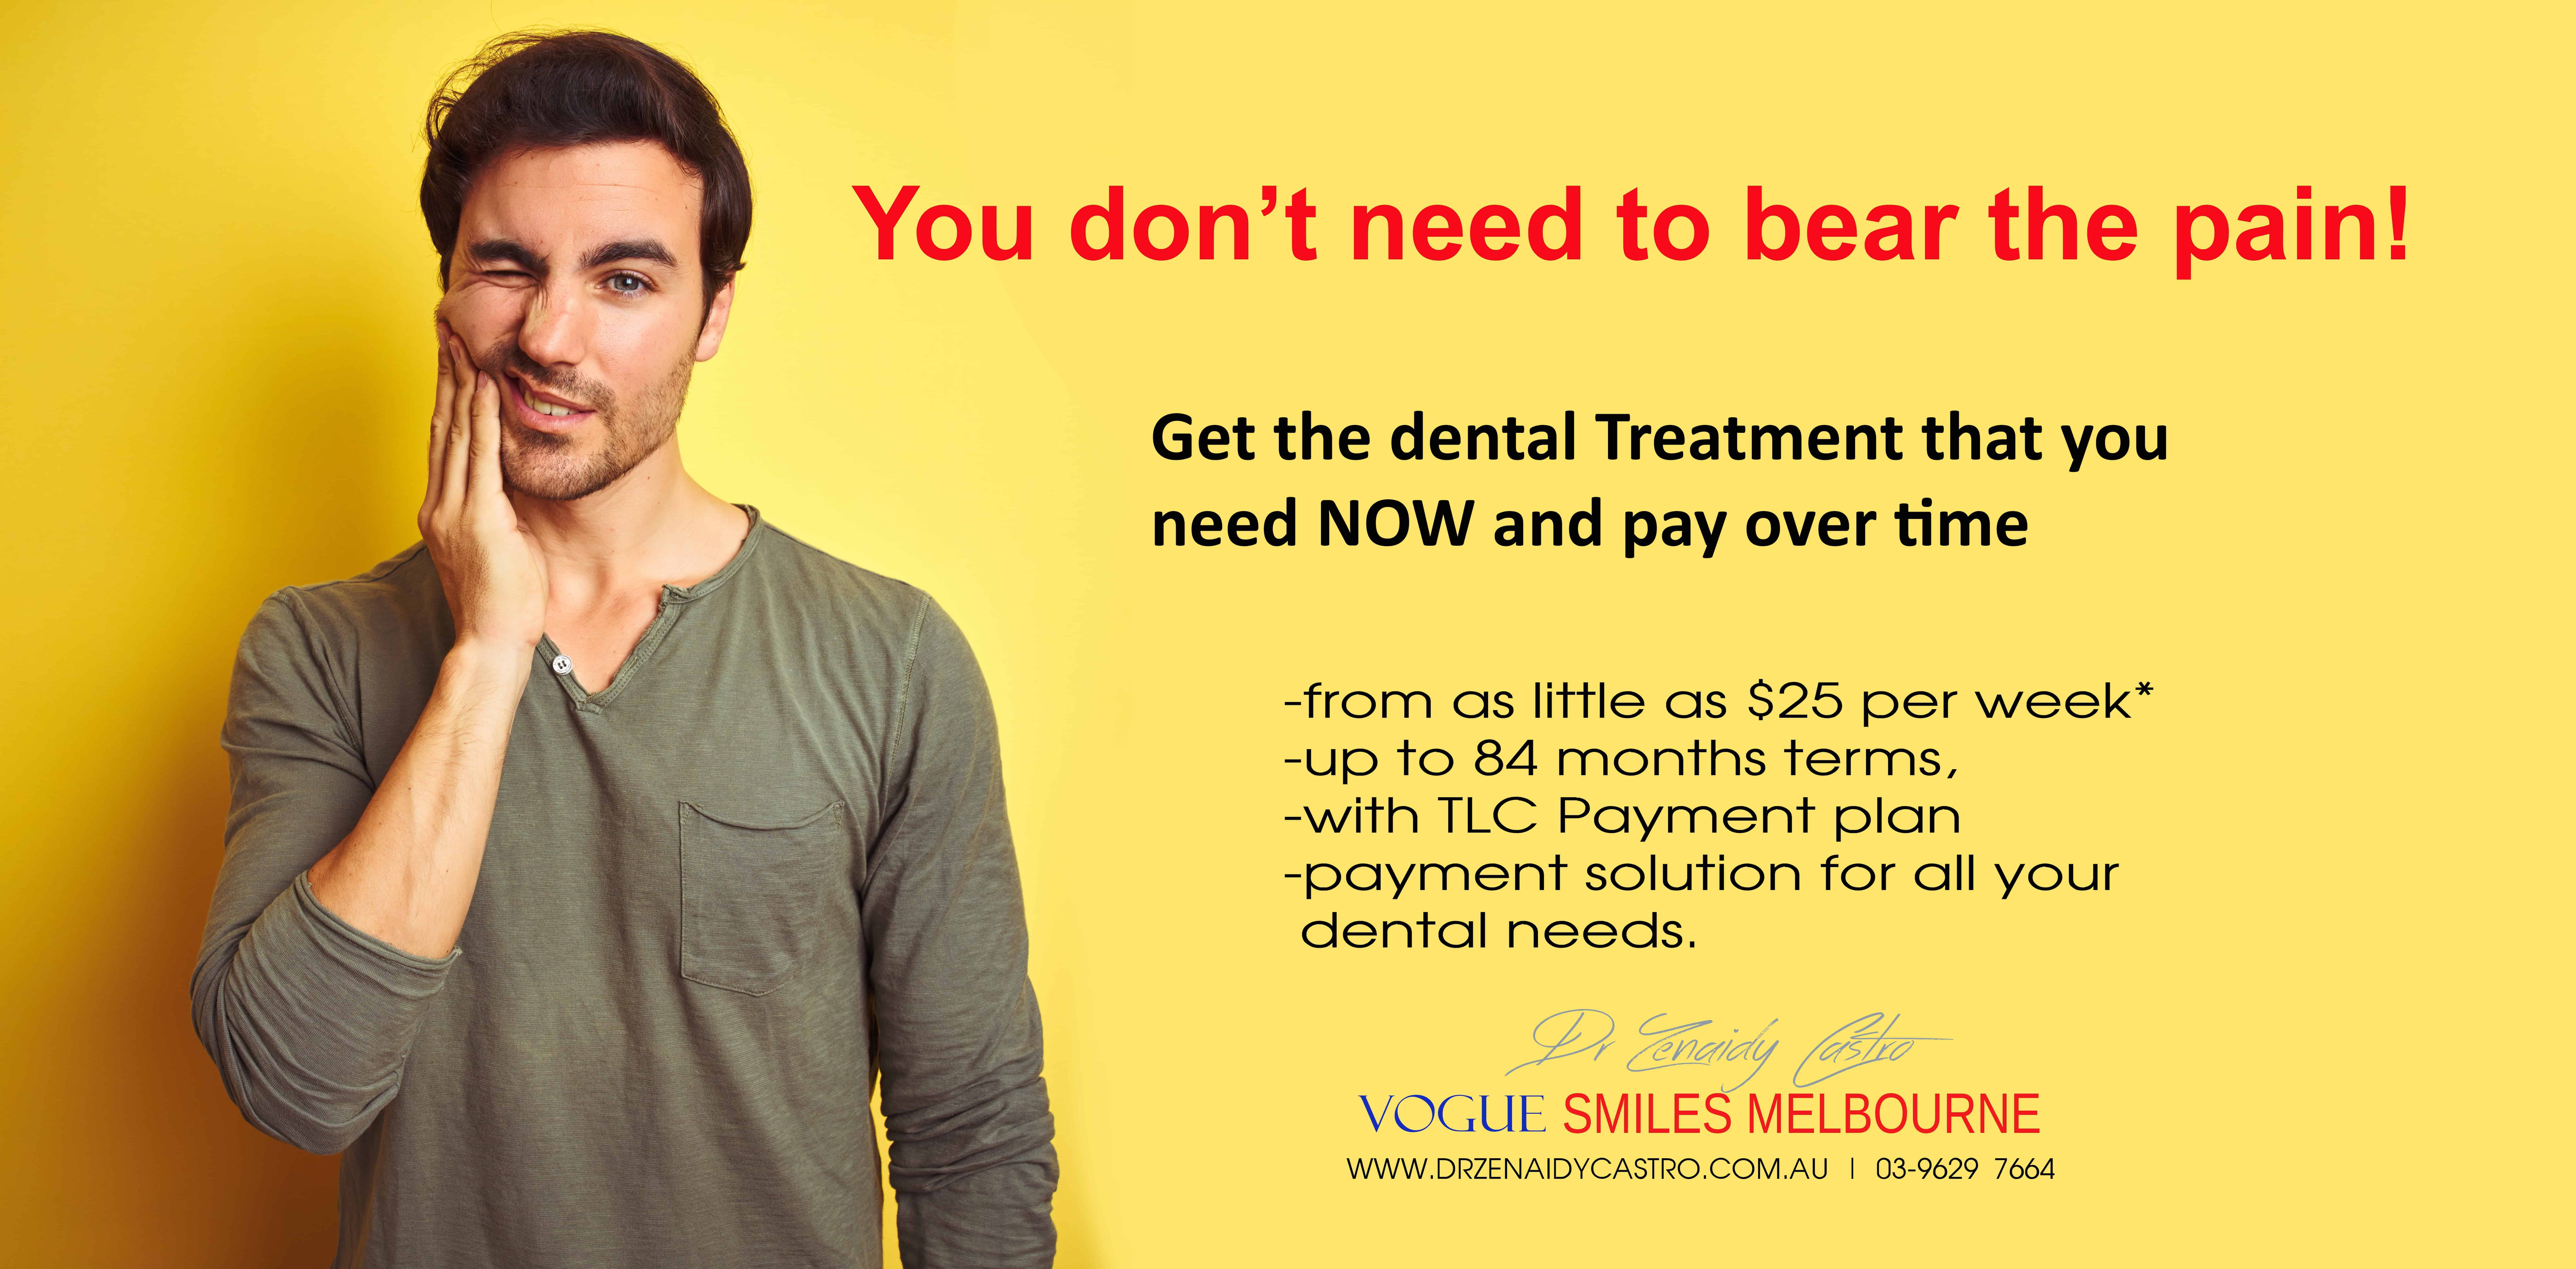 Badly Broken down and damaged Tooth Repair - TREATMENT Dental Crown specialist Melbourne CBD City 3000 Victoria Australia